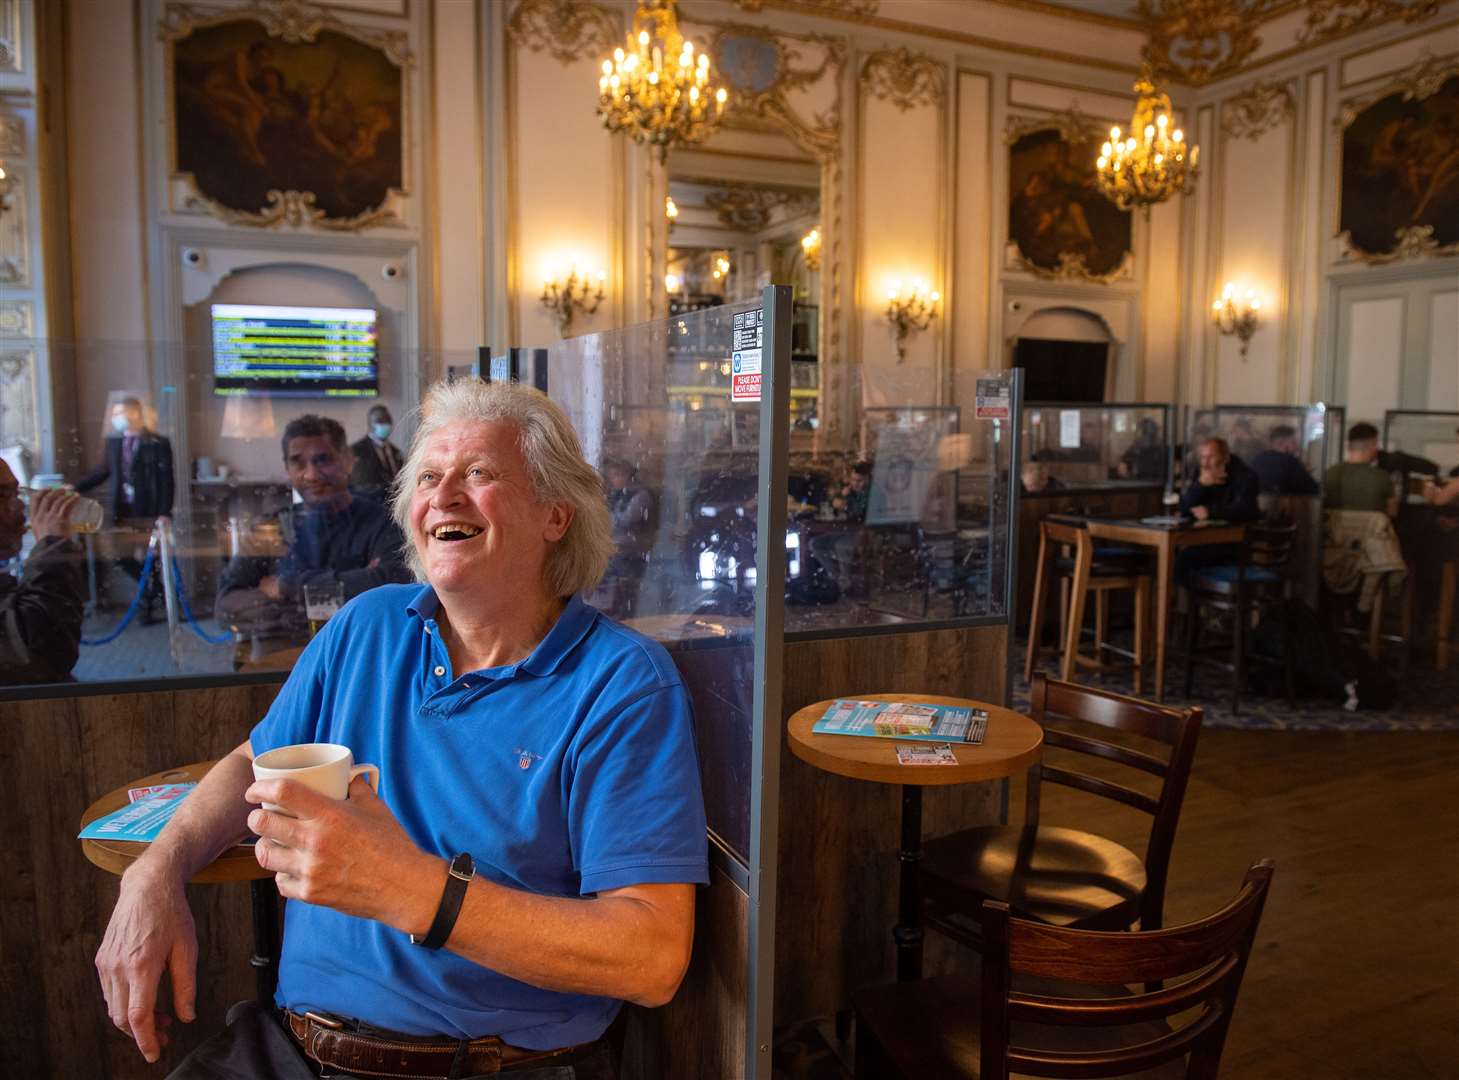 Founder and chairman of JD Wetherspoon, Tim Martin, said he expects the business to return to ‘more normal’ in the spring and summer (Dominic Lipinski/PA)